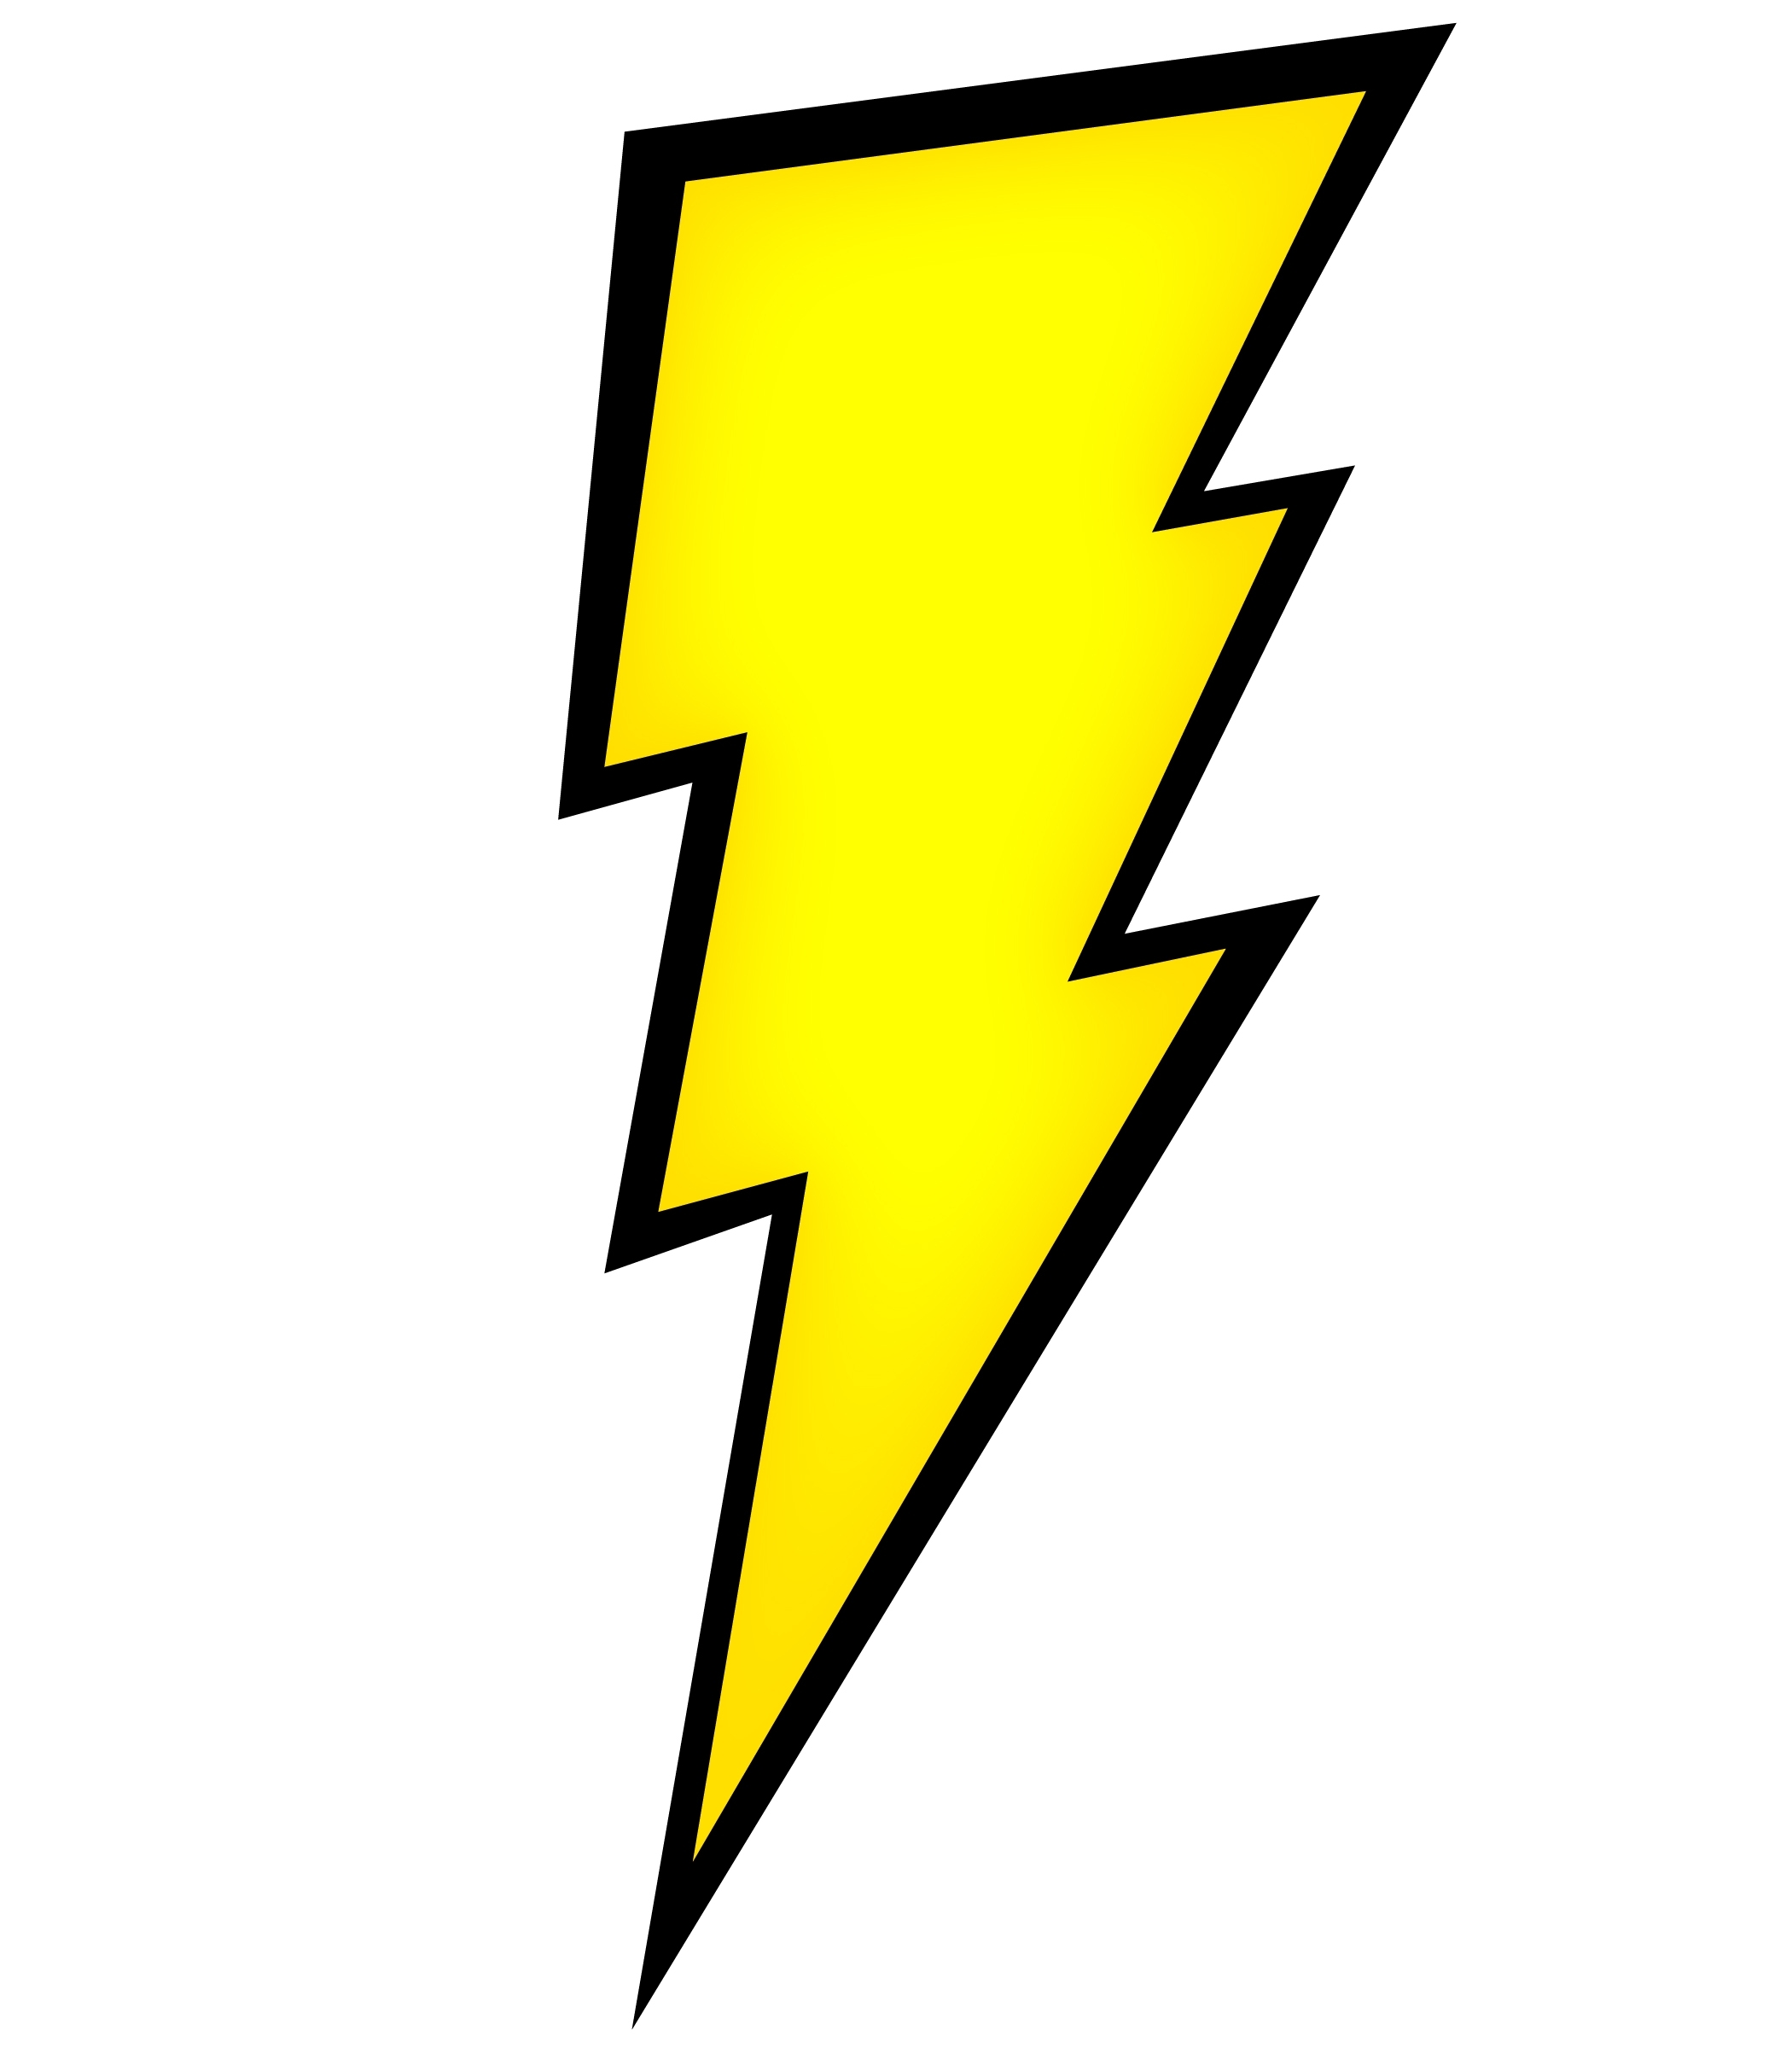 Picture Of A Lightning Bolt | Free Download Clip Art | Free Clip ...